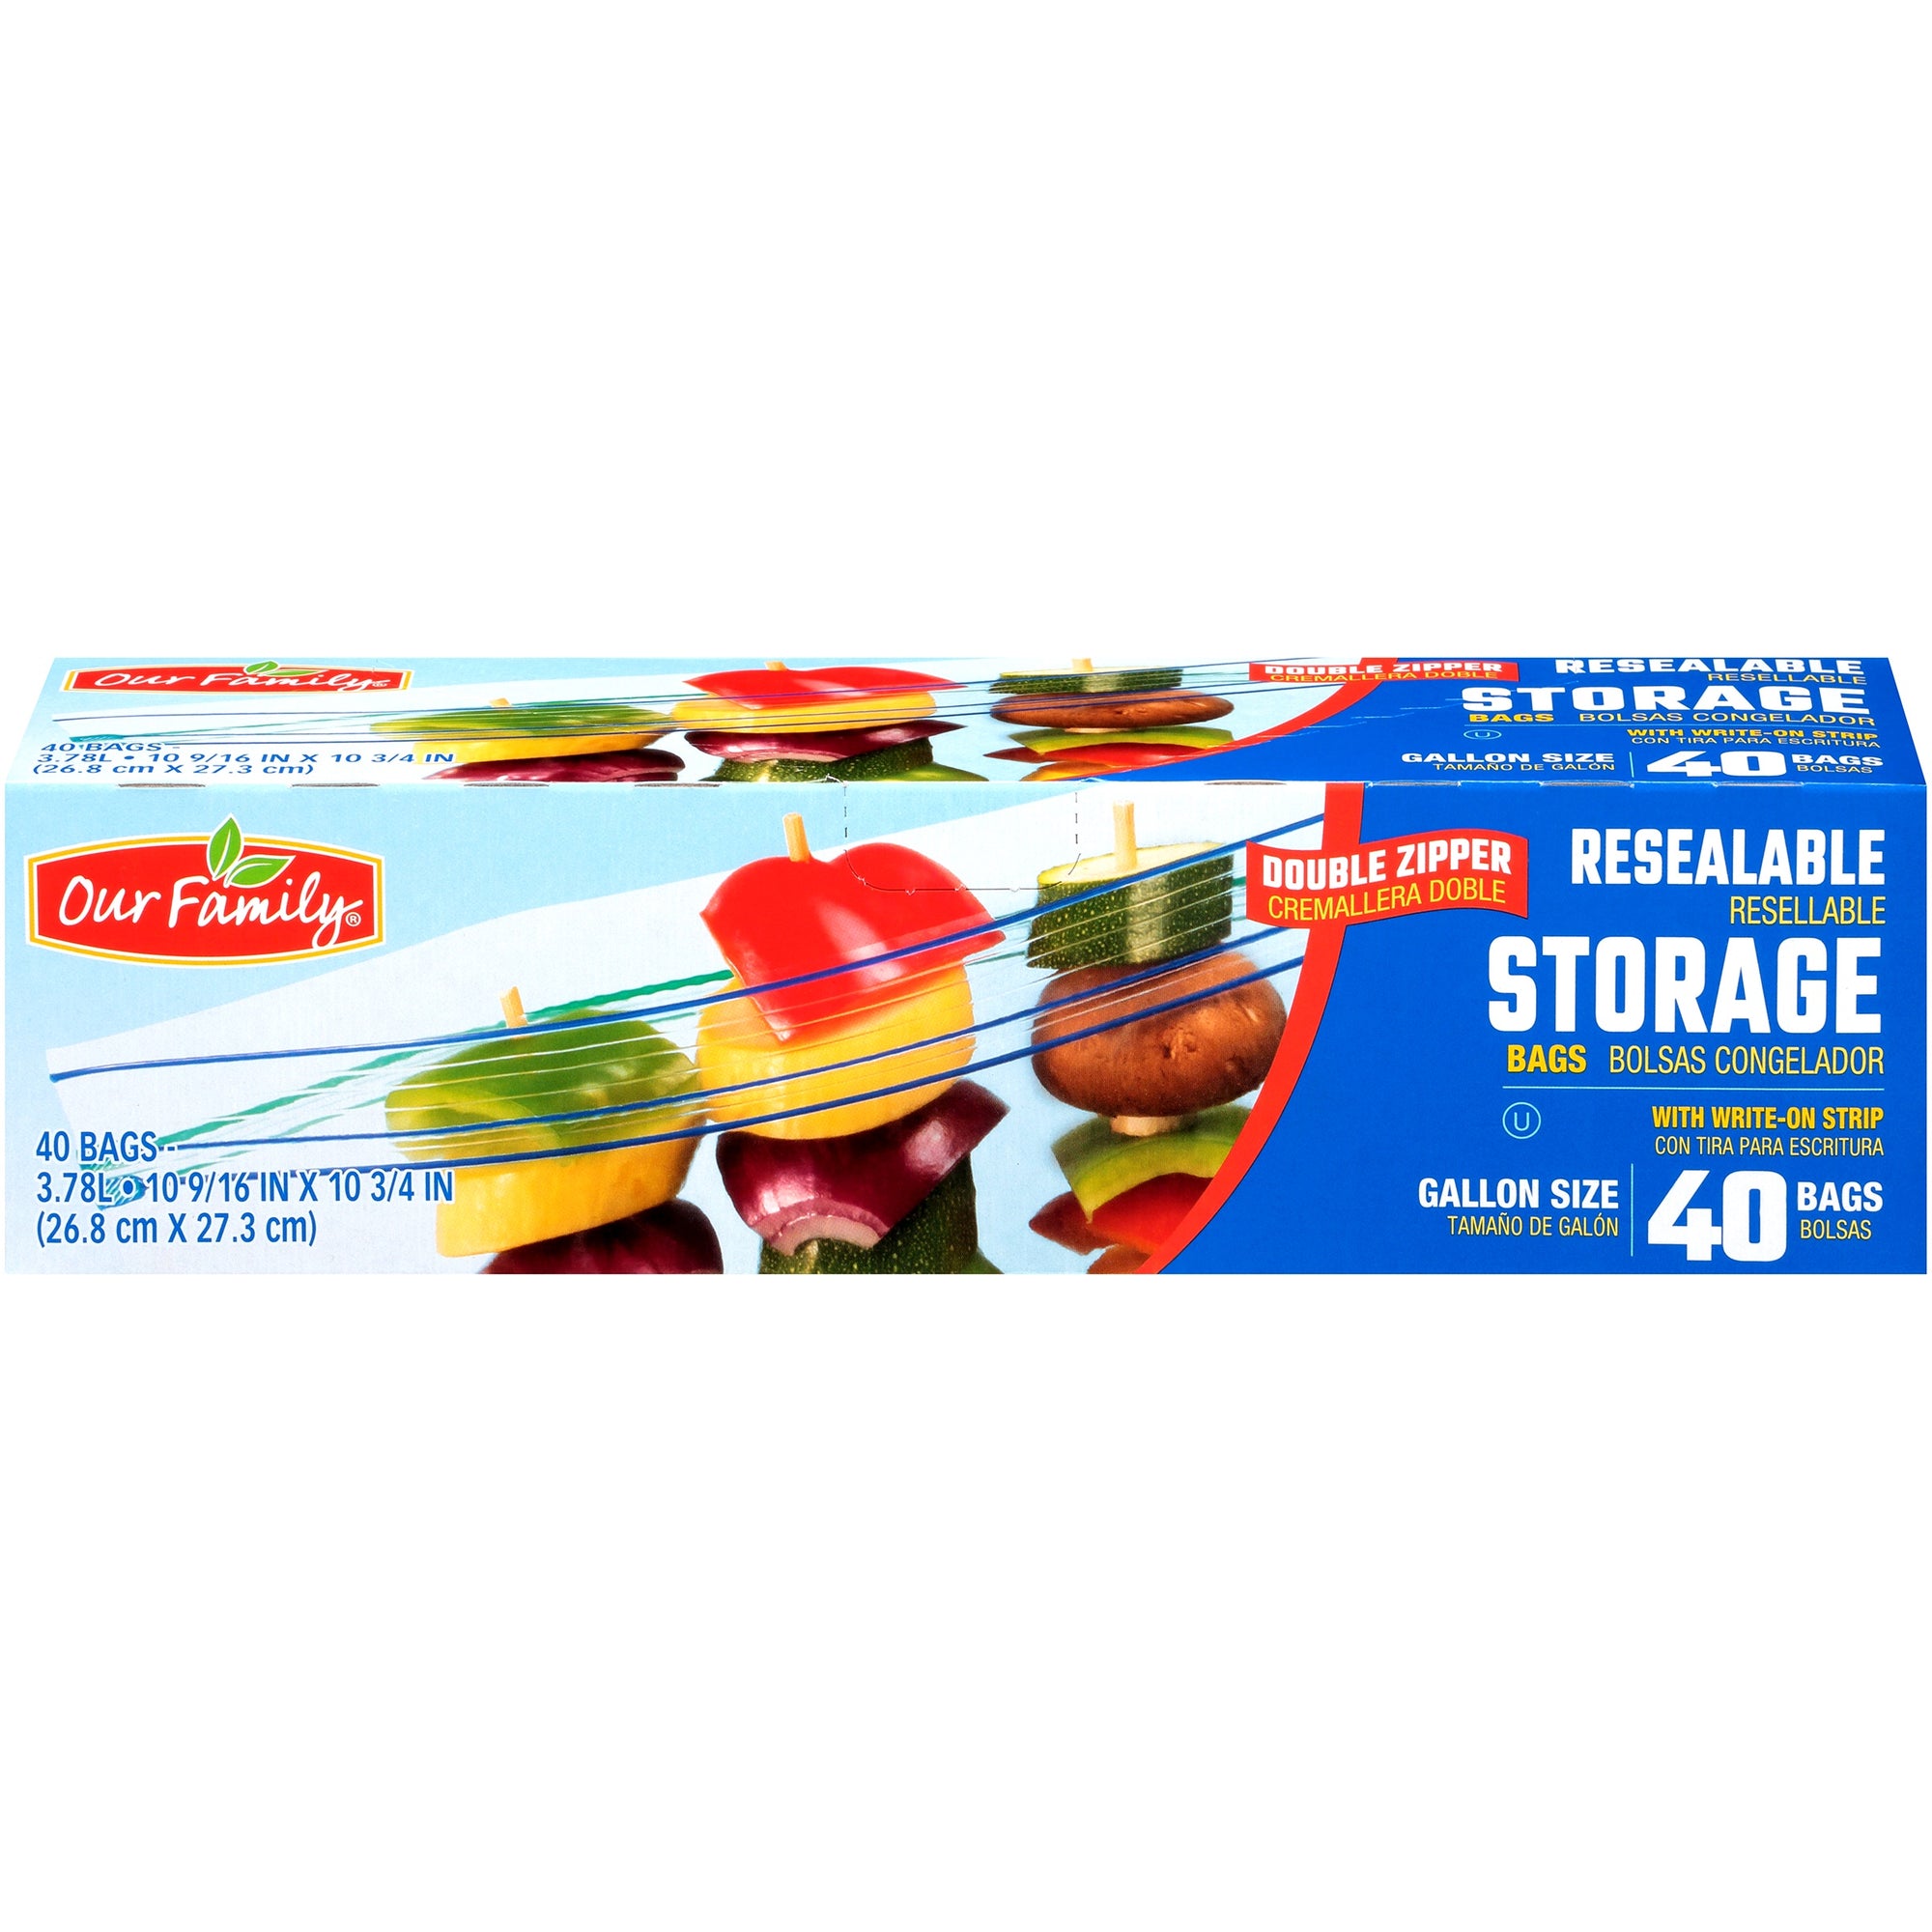 Our Family Storage Bags Gallon Size 40ct